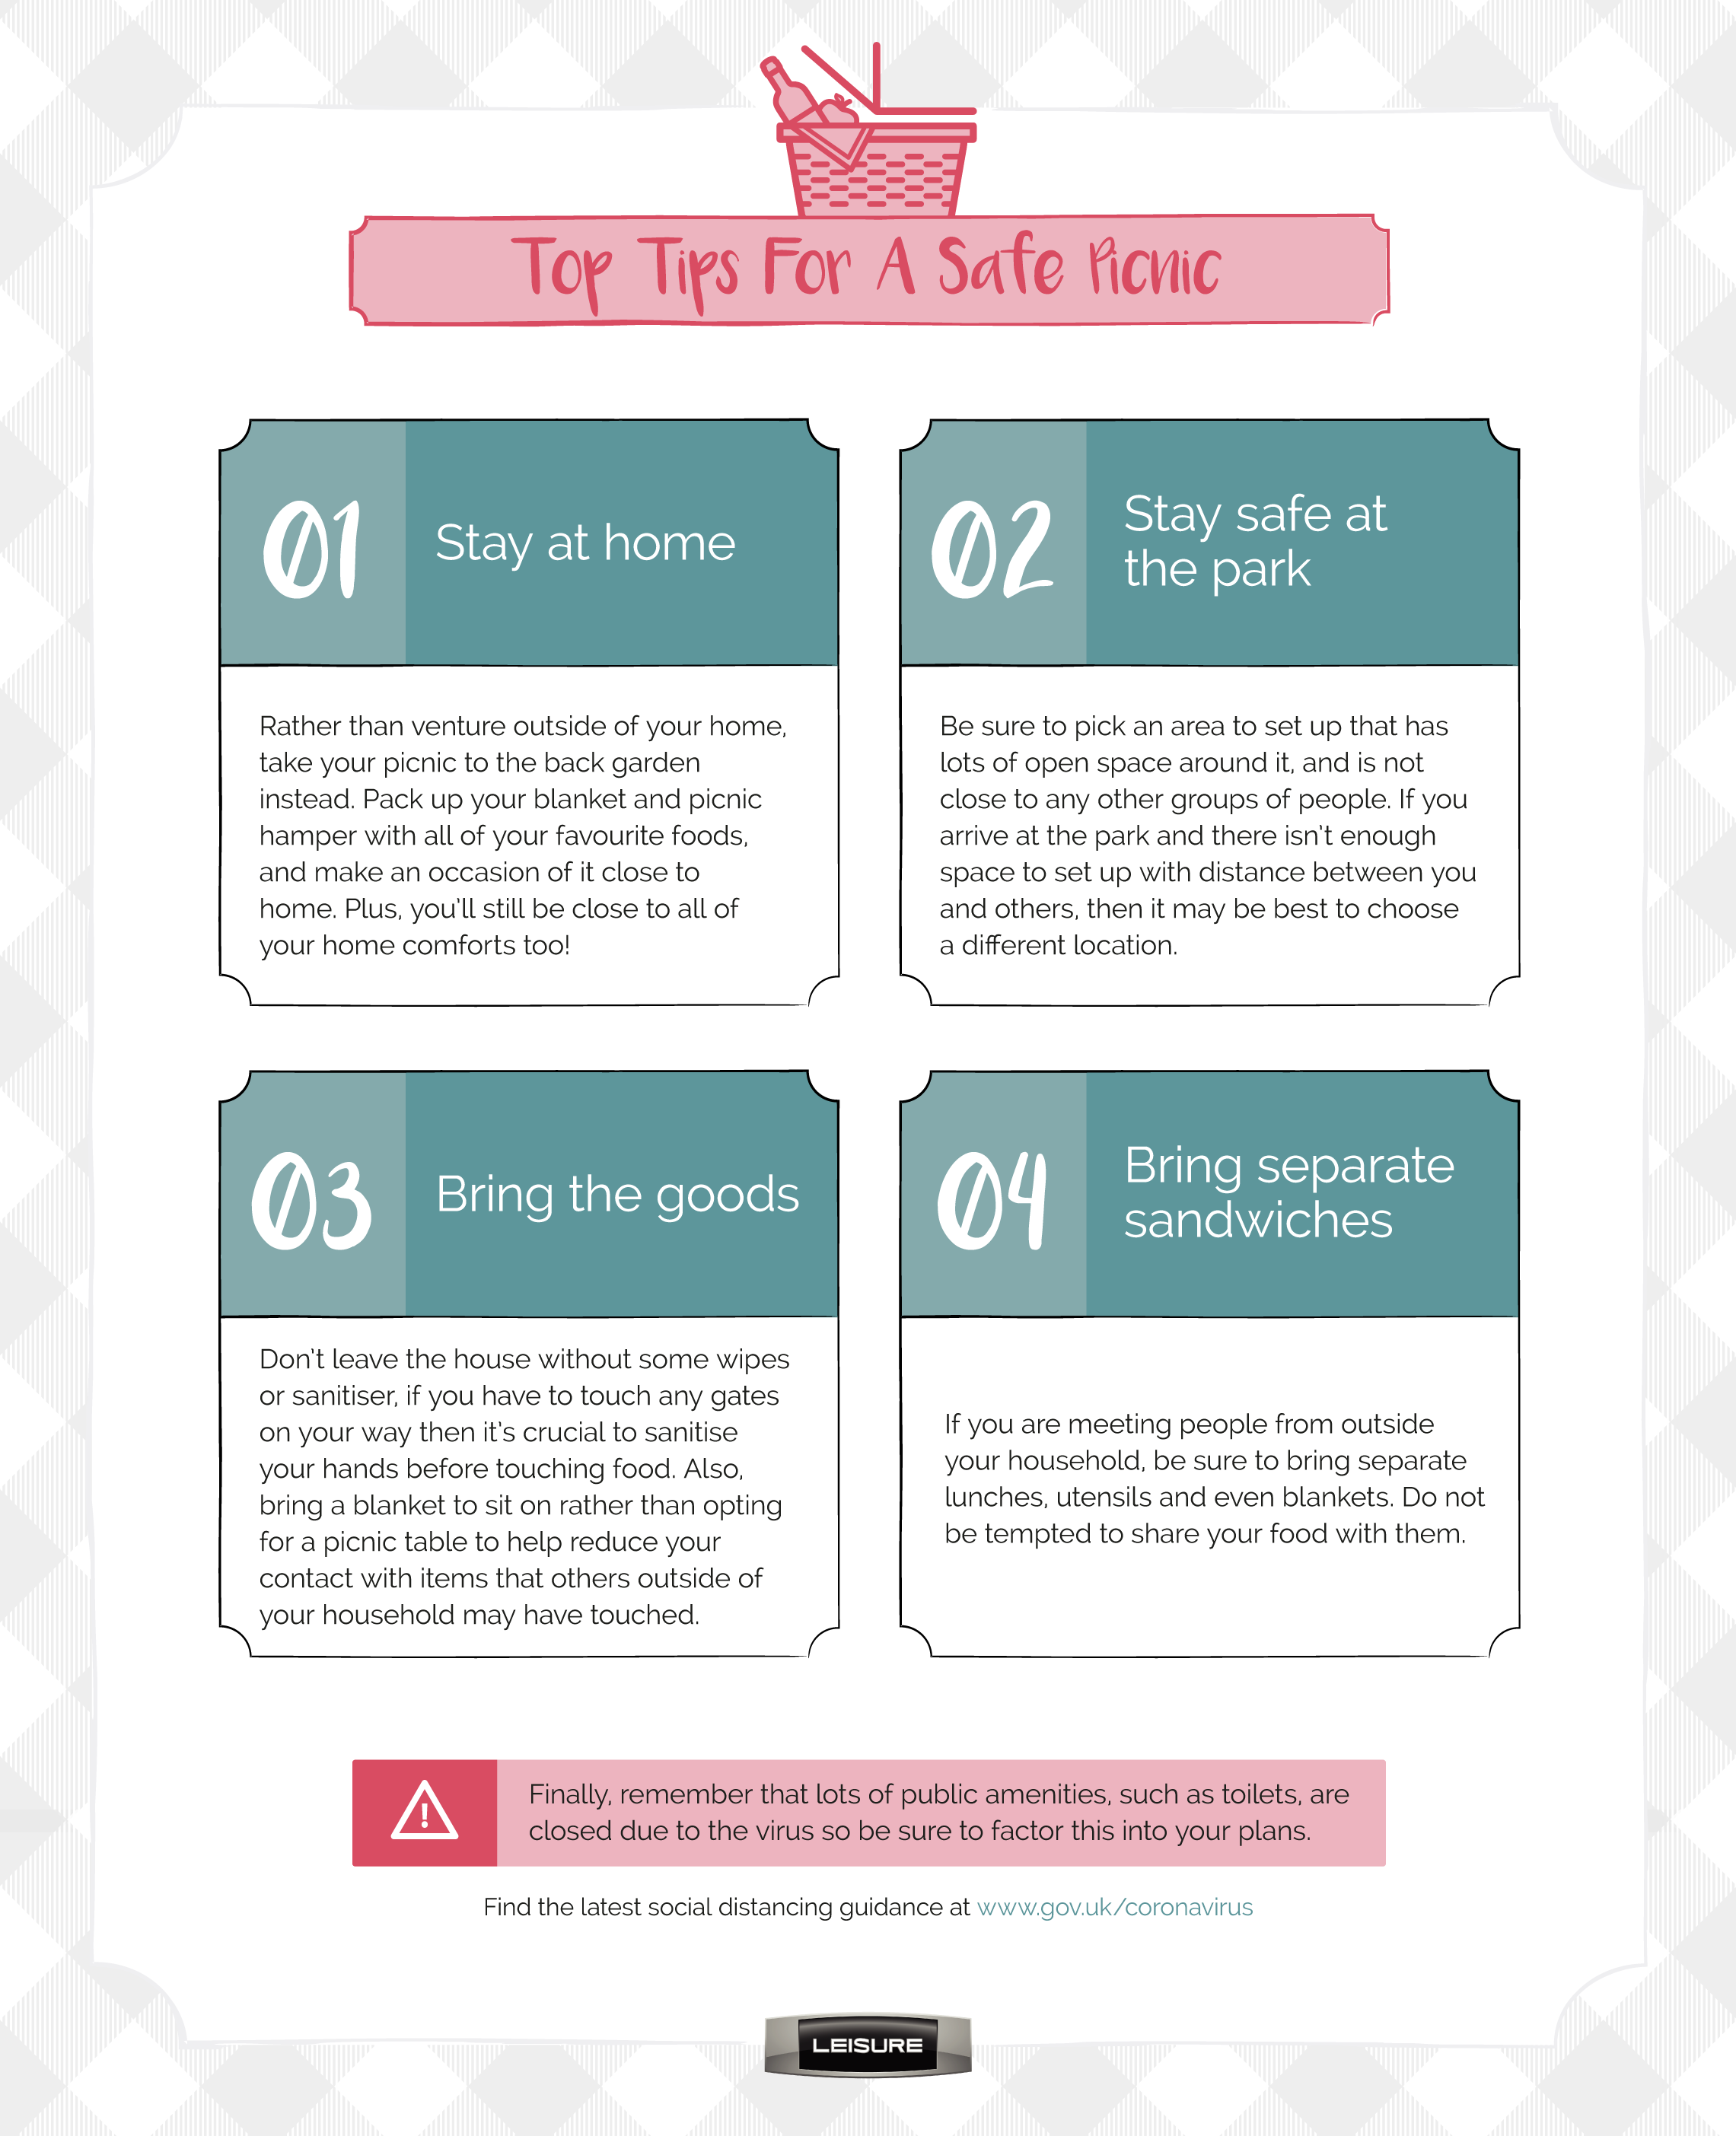 Top Tips For A Safe Picnic